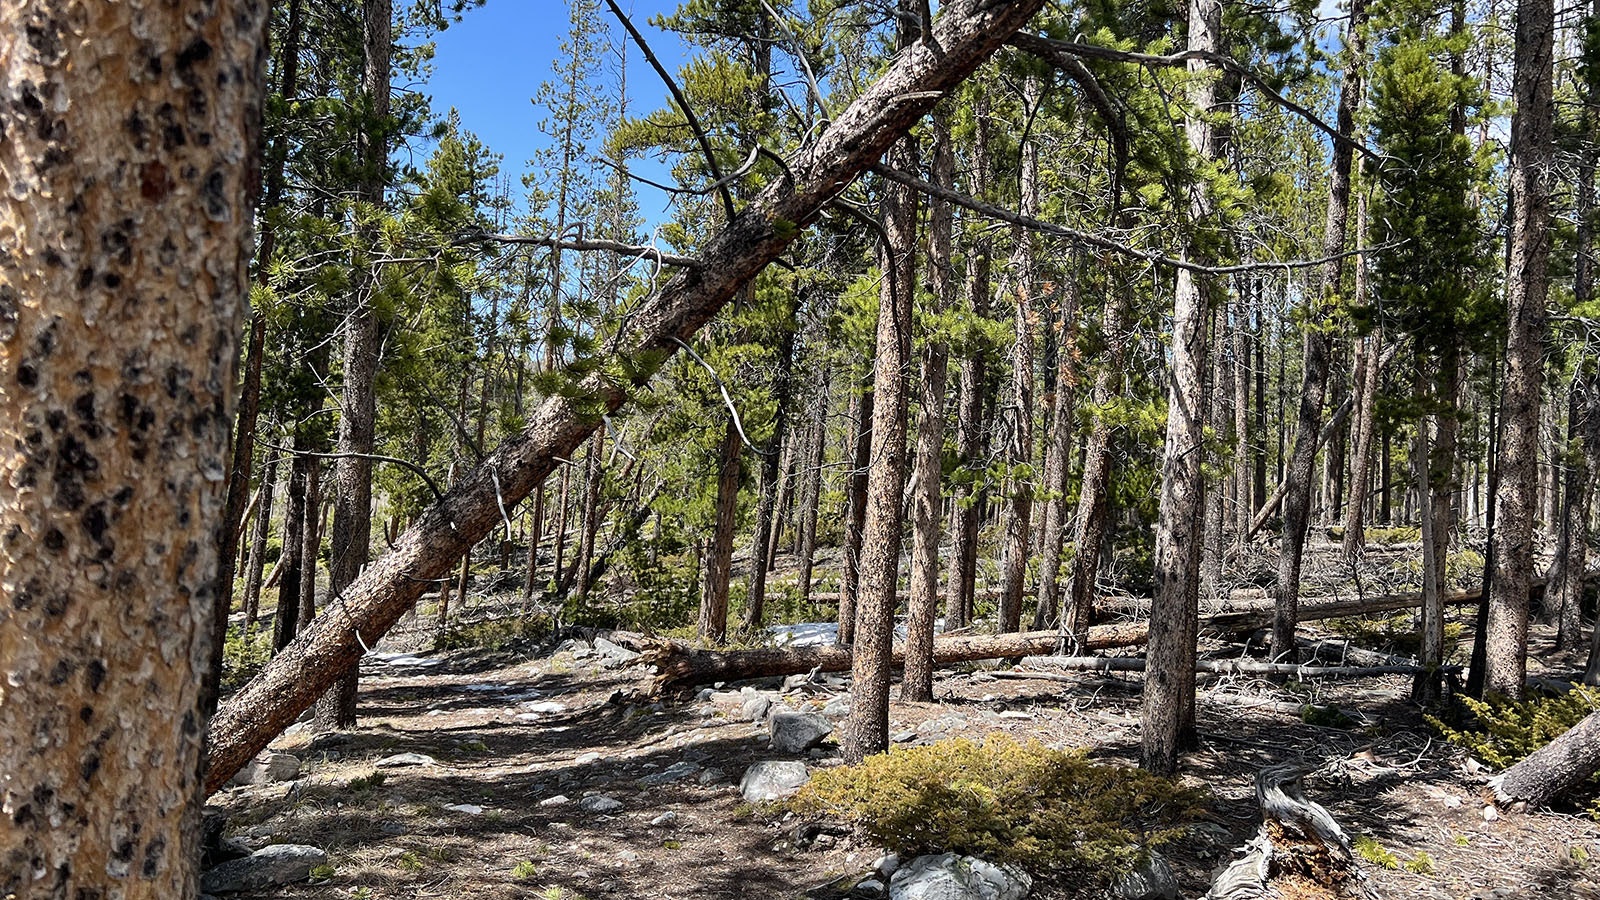 A “widow maker,” or precariously-balanced tree broken by recent high winds, looms over the Meadow Loop trail in the Snowy Range Mountains near Laramie.